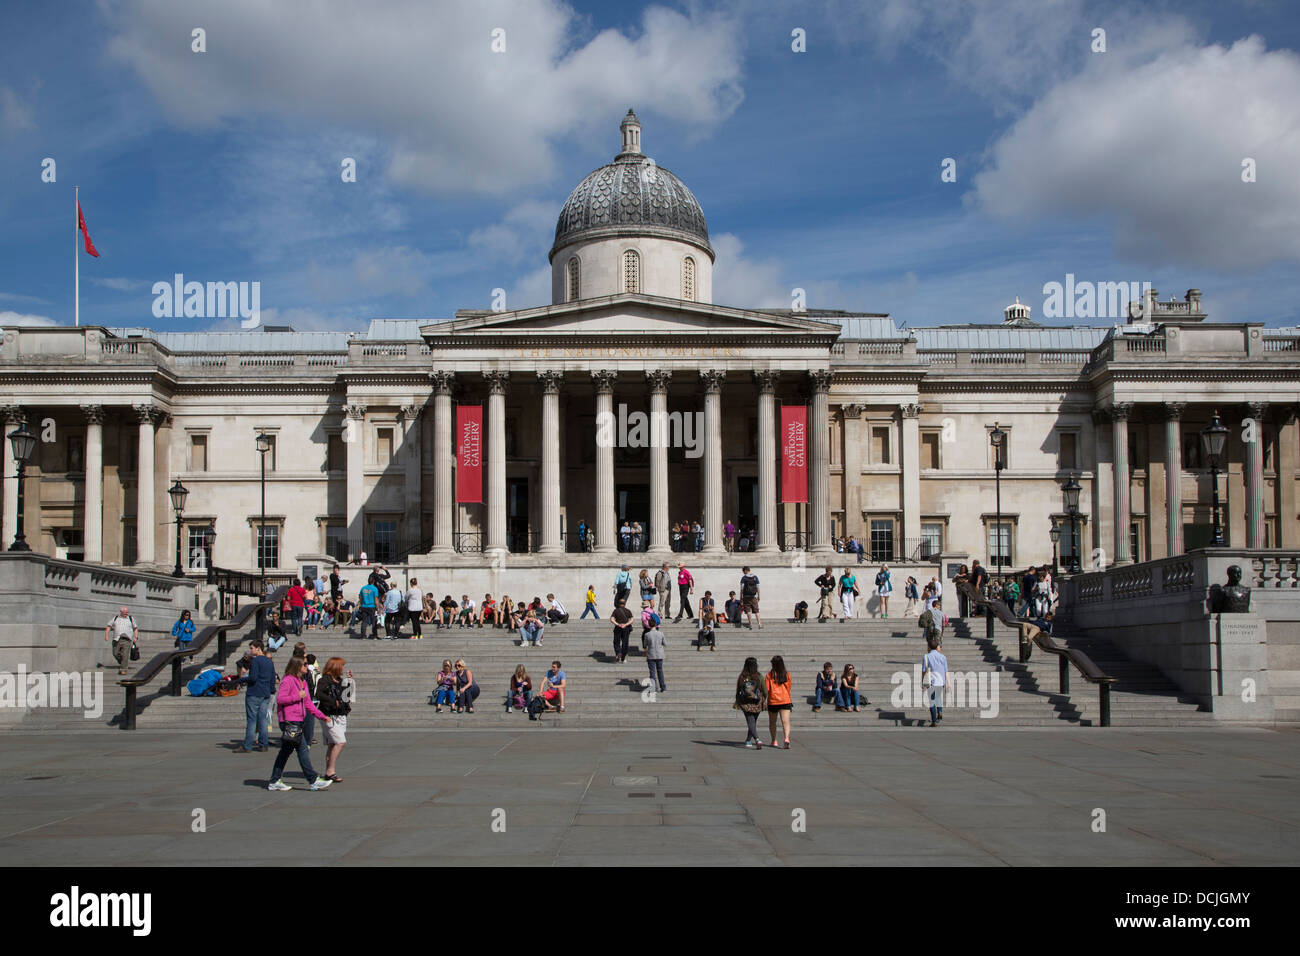 A view of the National Gallery facade in London taken from  Trafalgar Square. Stock Photo